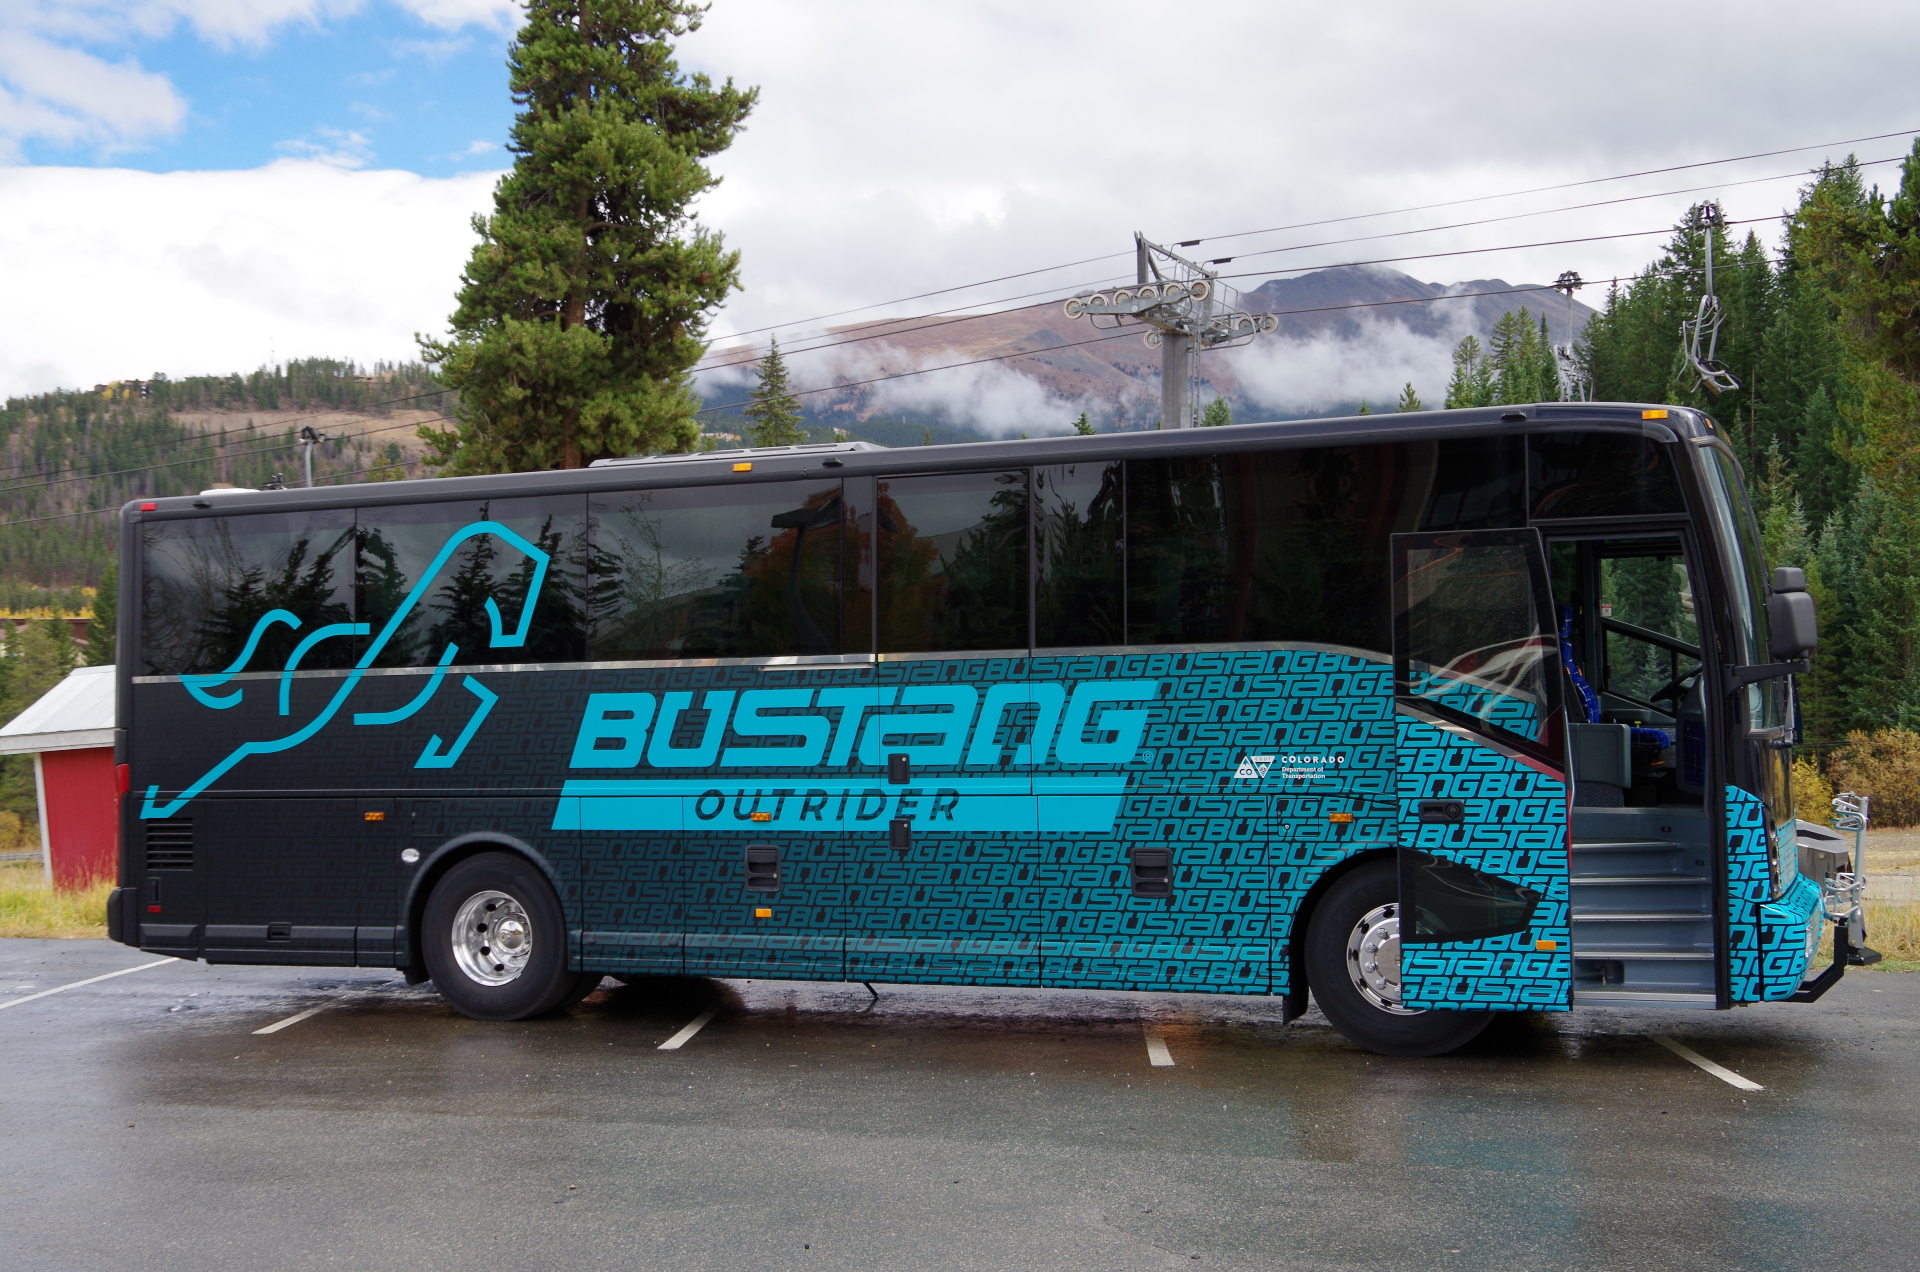 CDoT describes Bustang Outrider as a regional bus network that connects rural Colorado (Credit – CDoT)